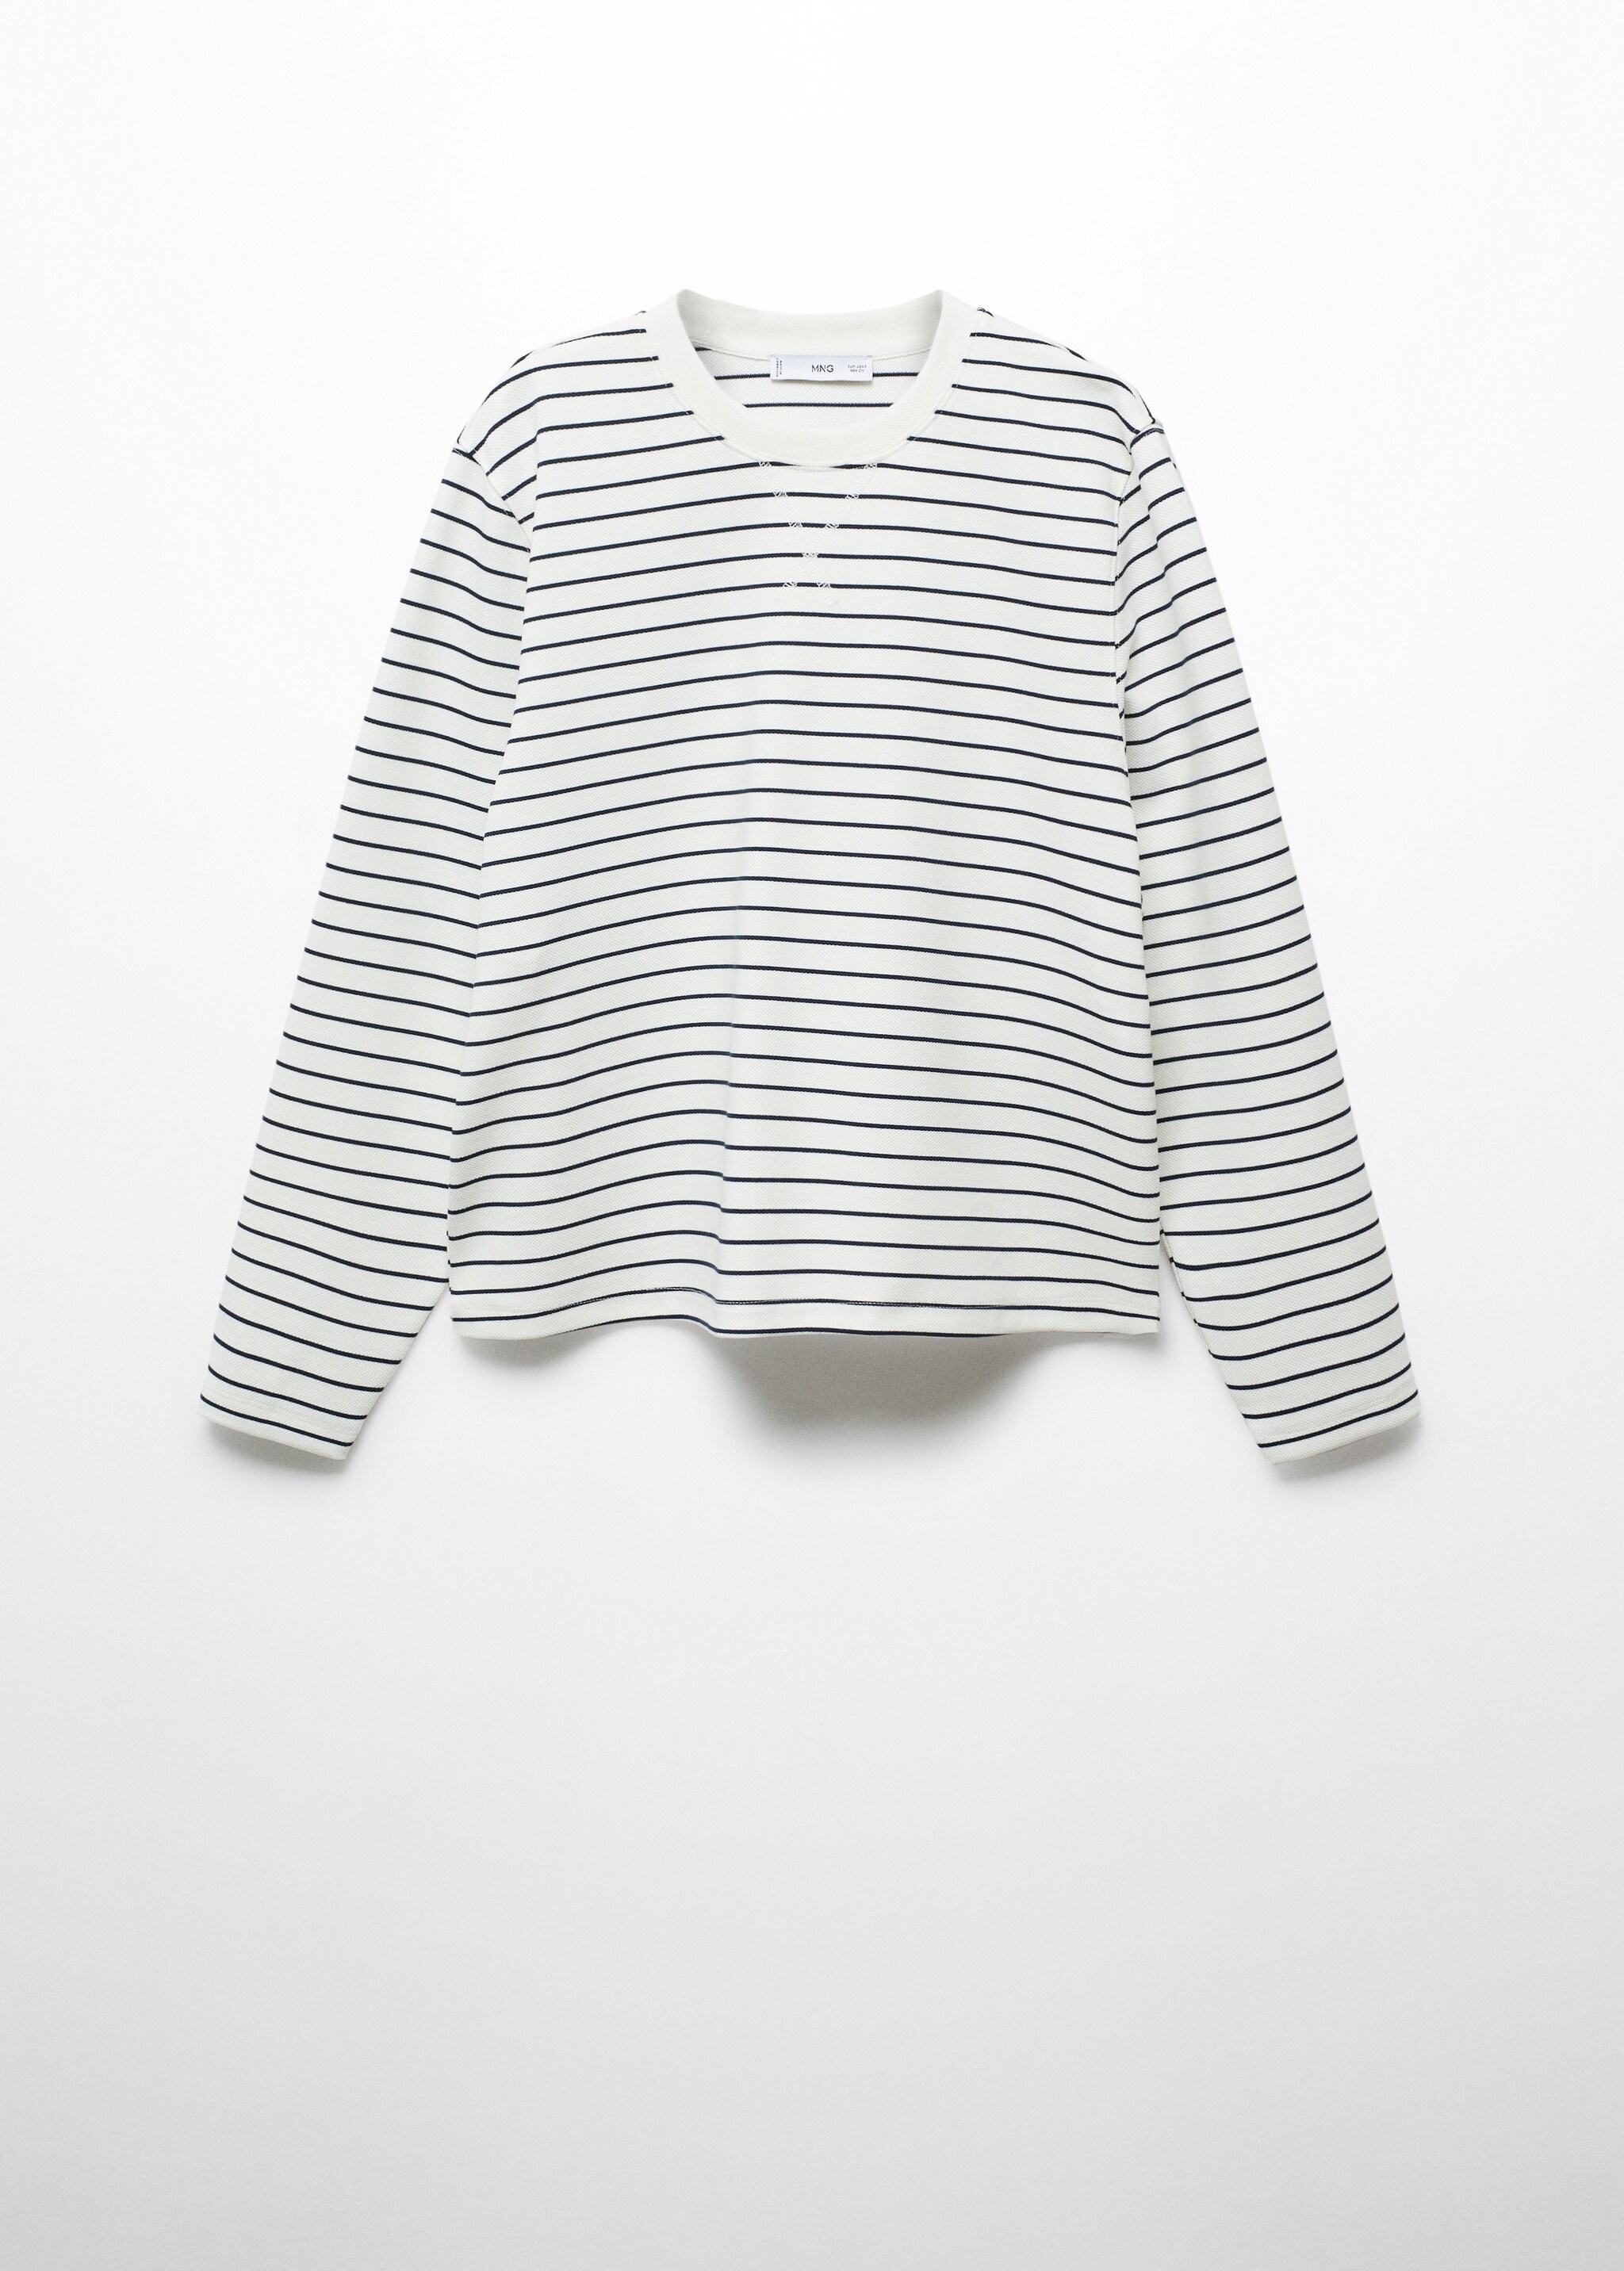 Striped sweatshirt - Article without model